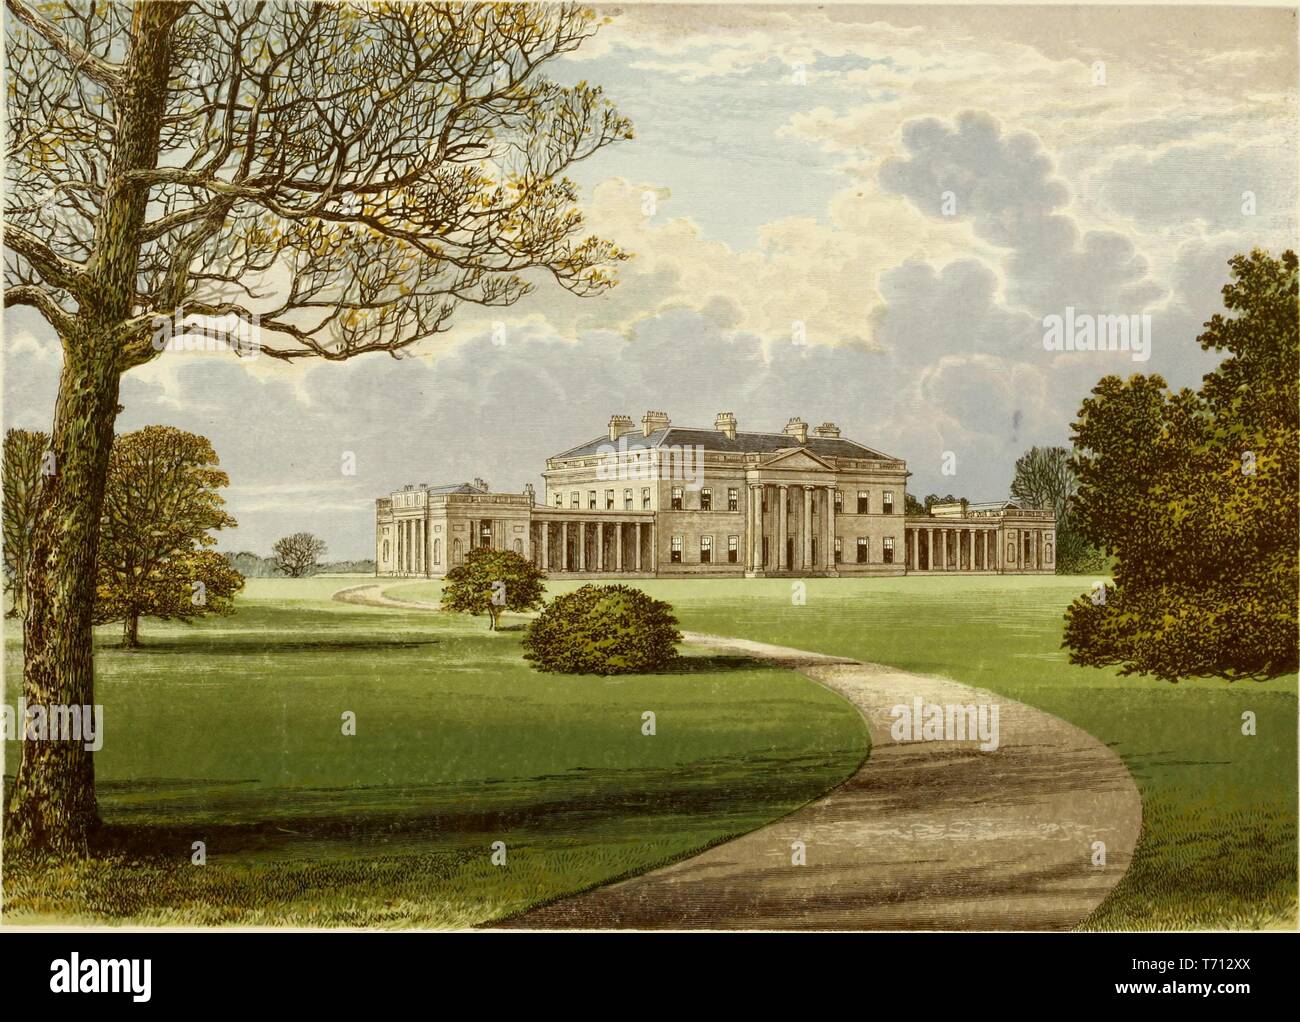 Color print depicting a path winding through an expansive green lawn, leading to Castle Coole, a large 18th century building, built in a Neo-Classical Revival style, with a pale stone facade, located in Northern Ireland, published in FO (Francis Orpen) Morris's 'A series of picturesque views of seats of the noblemen and gentlemen of Great Britain and Ireland, with descriptive and historical letterpress', 1840. Courtesy Internet Archive. () Stock Photo